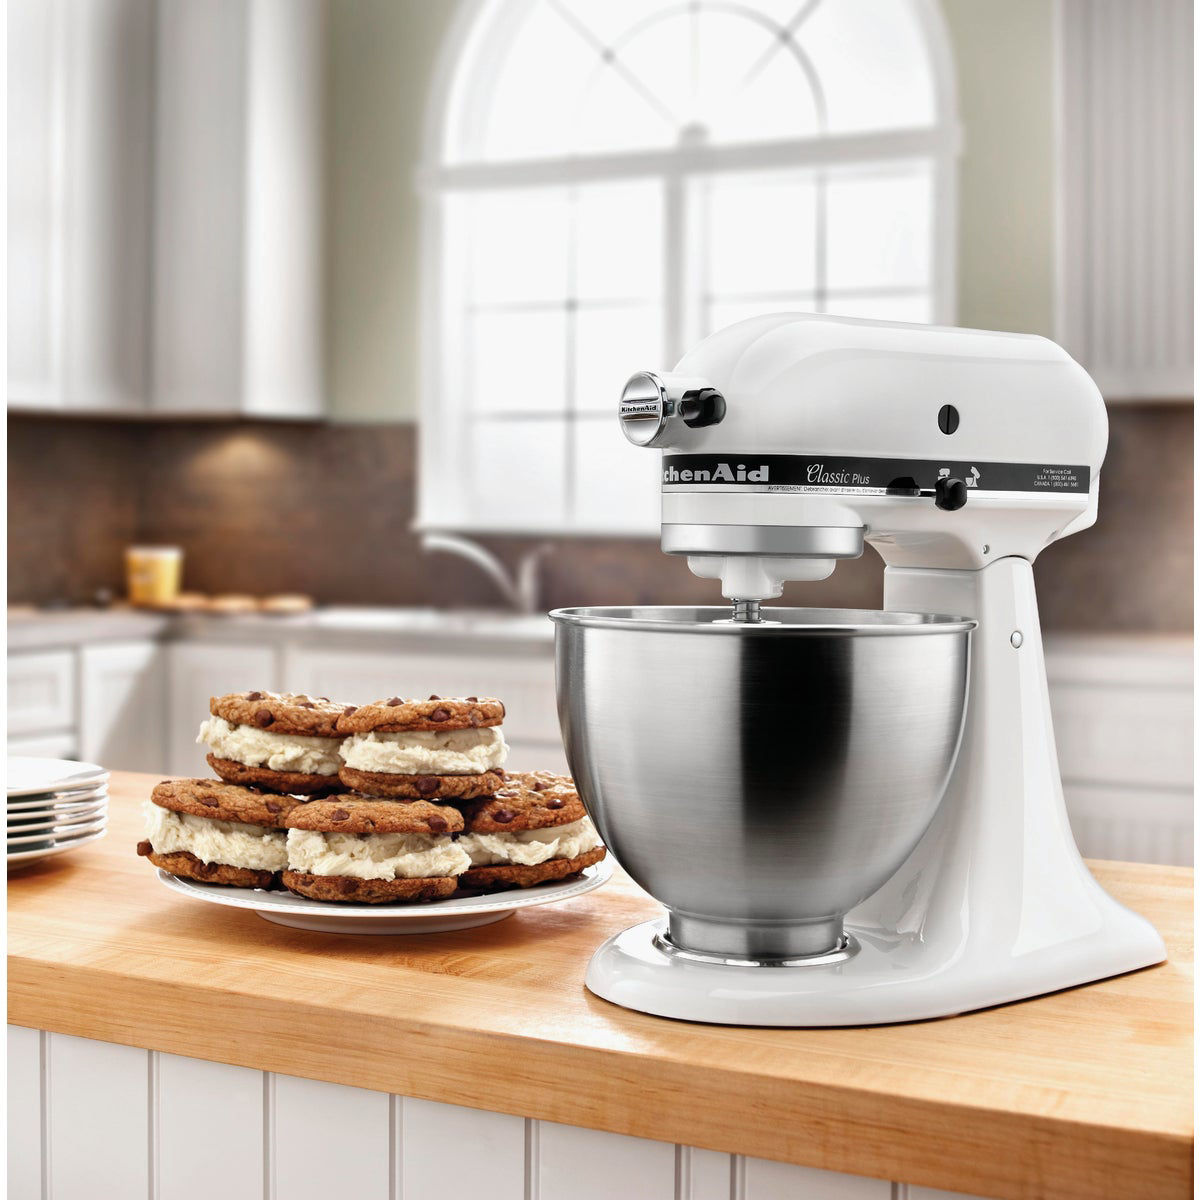 KitchenAid K45SSWH 2 KIT 10 Speed 4.5 Qt. Stand Mixer with